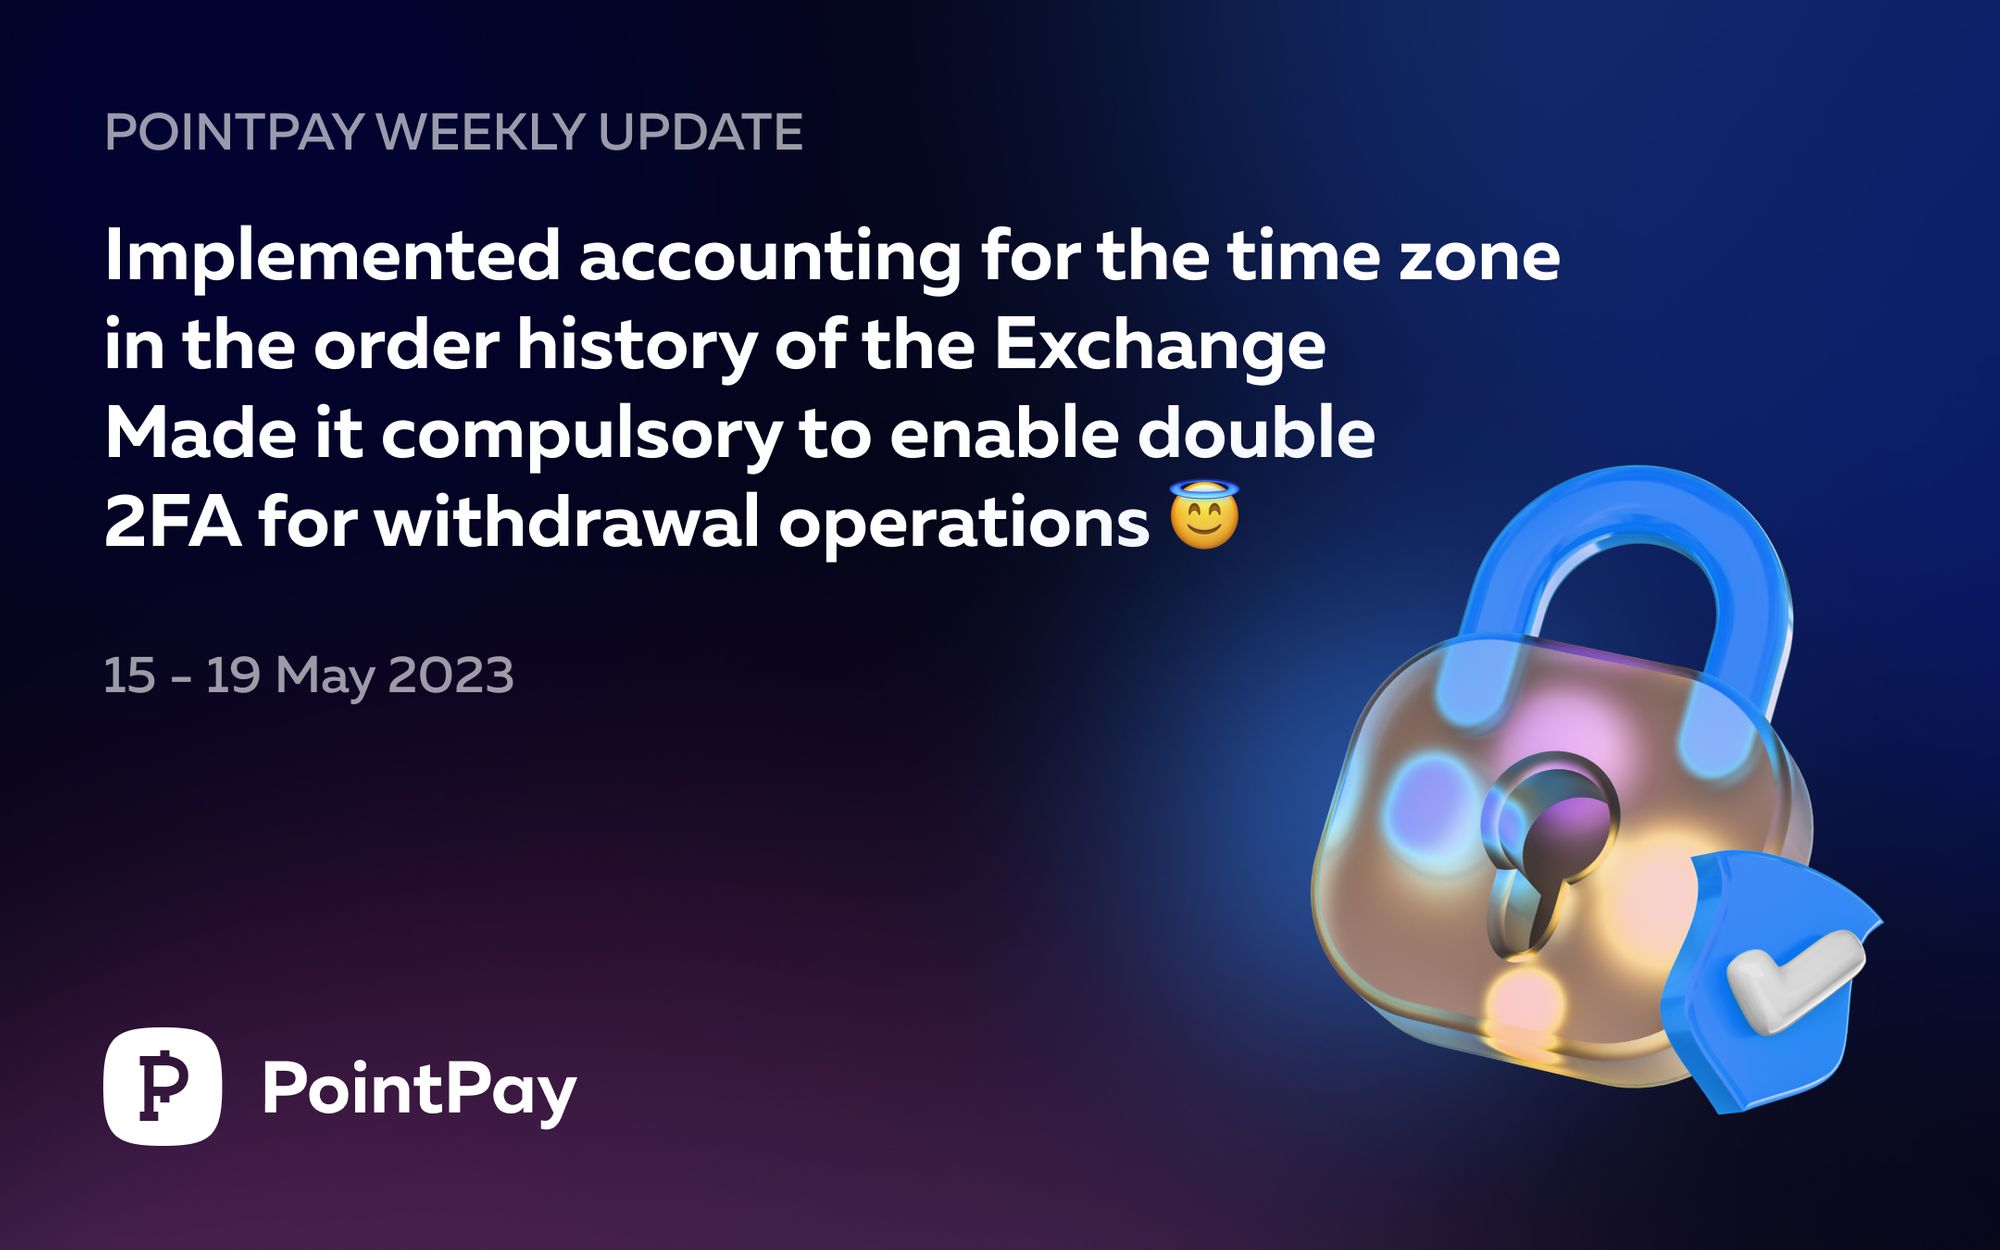 PointPay Weekly Update (15 - 19 May 2023)